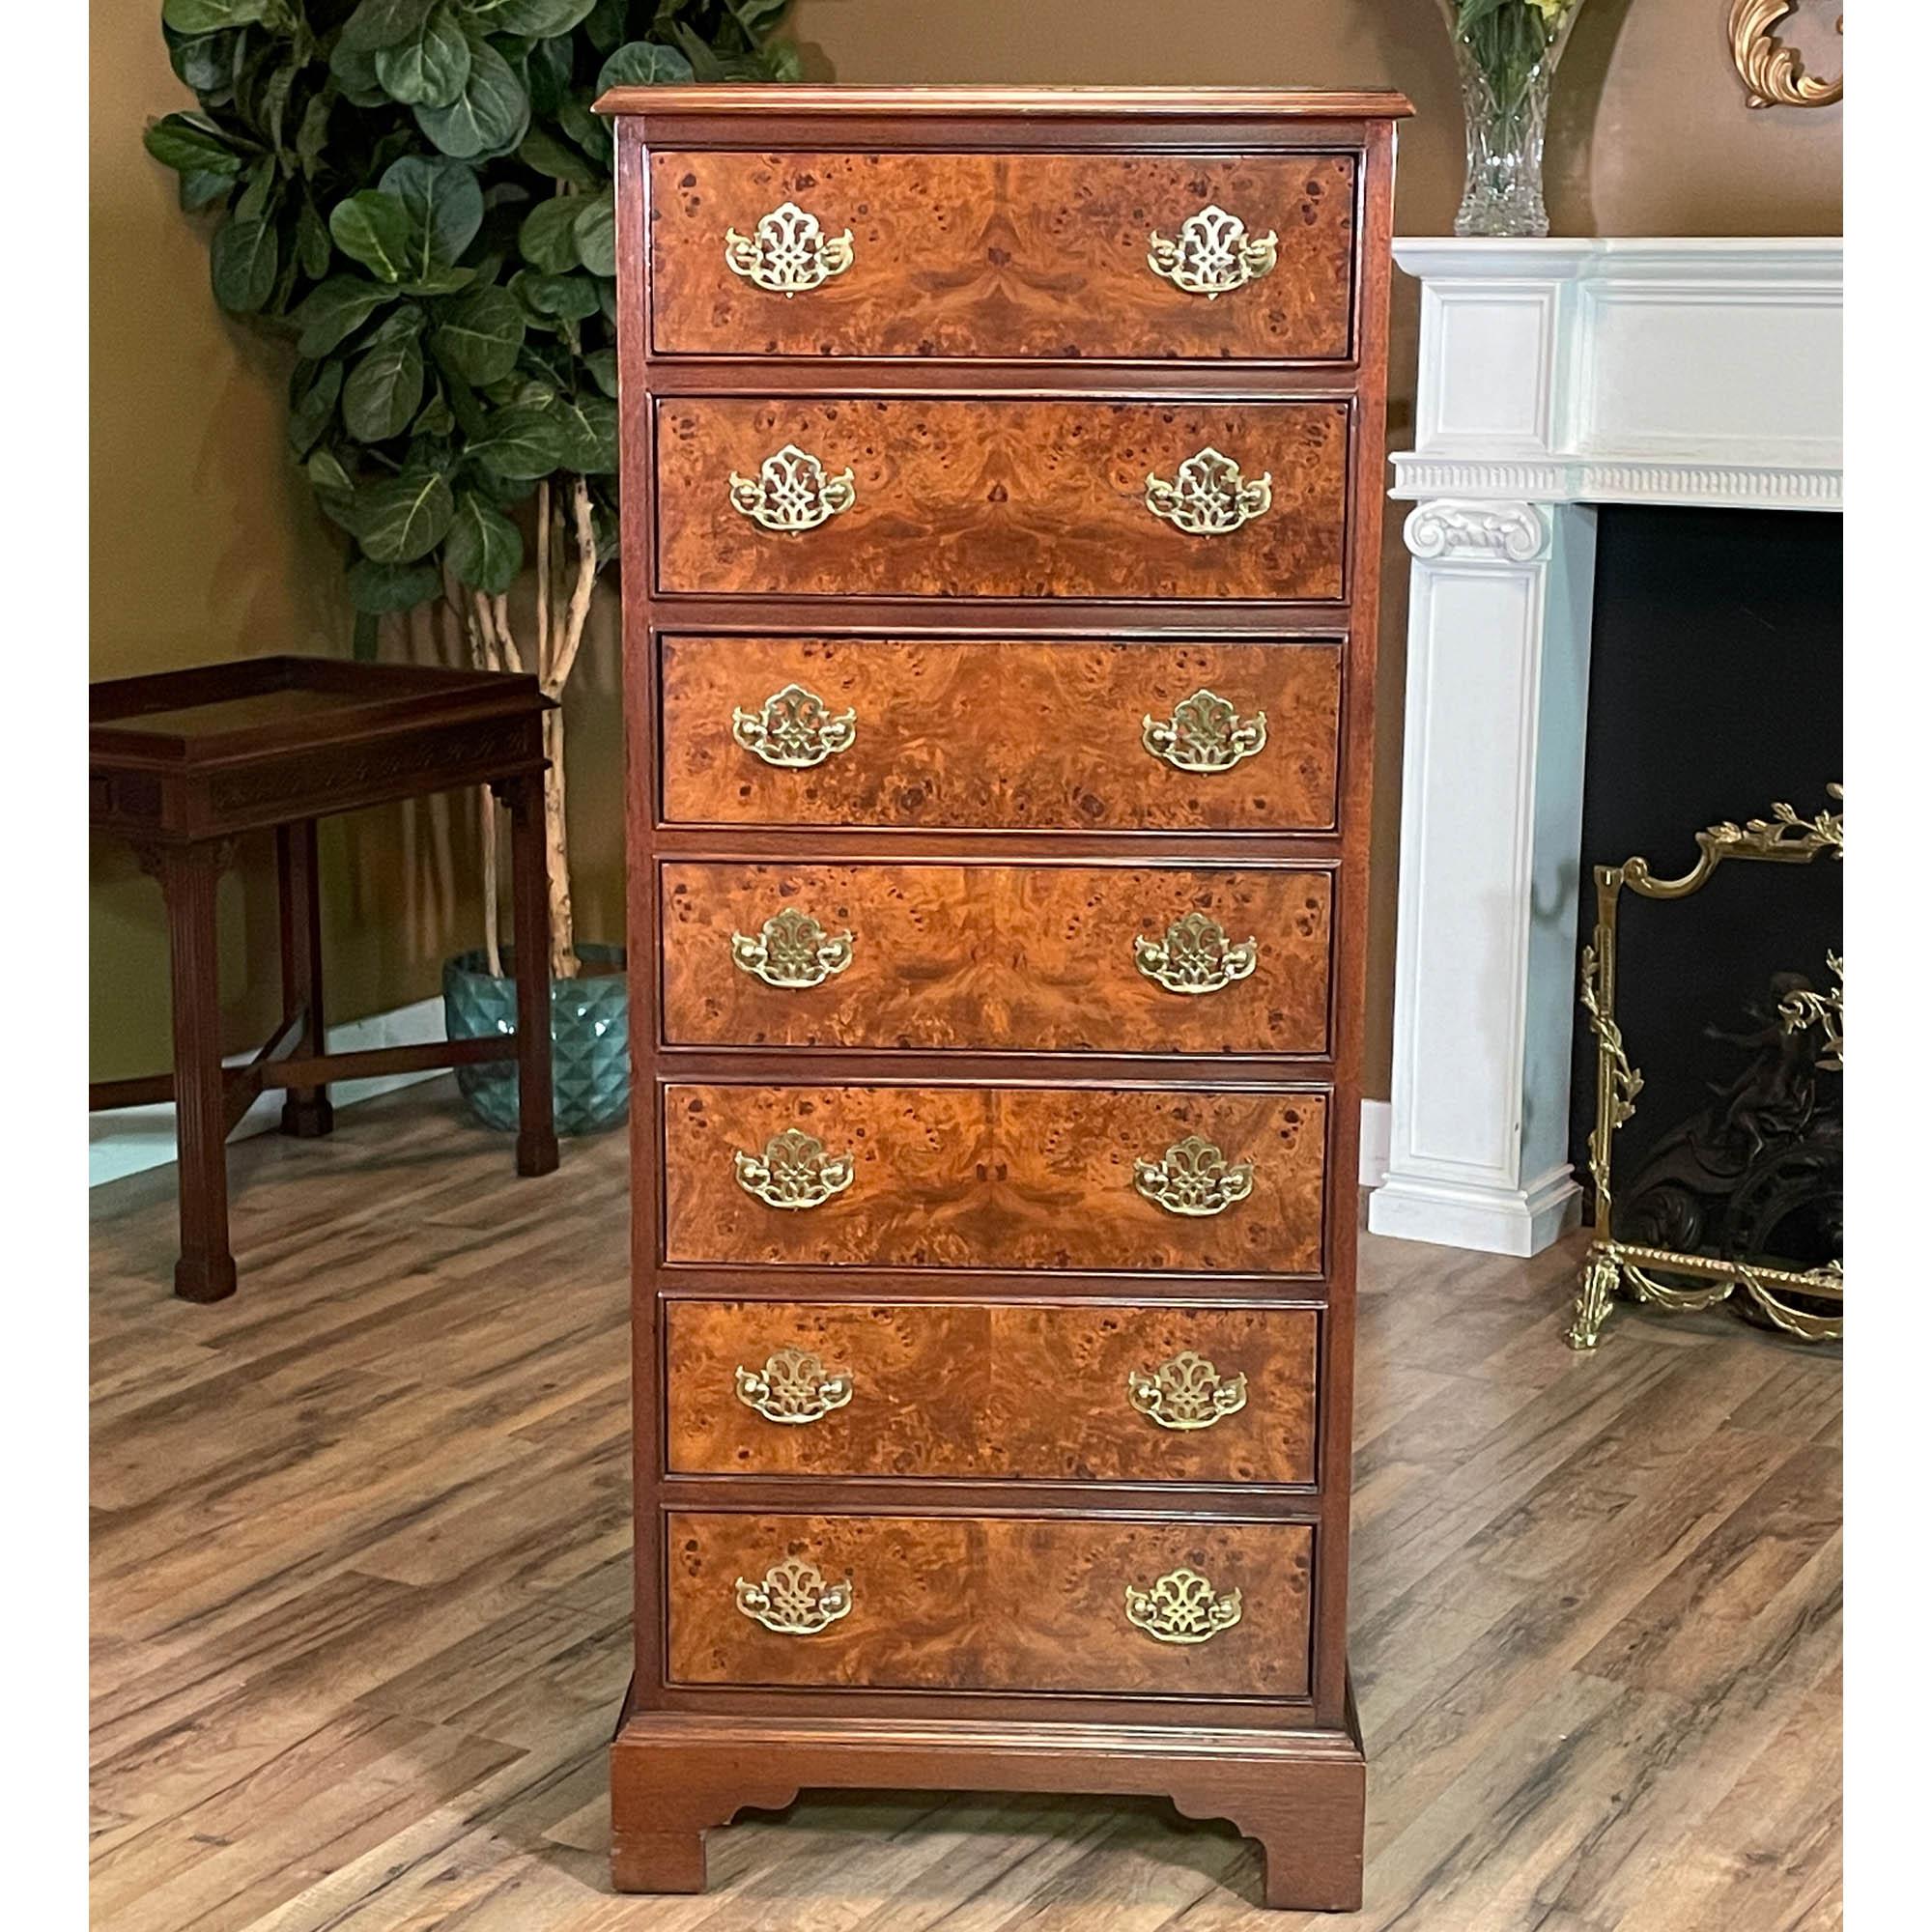 From Niagara Furniture a Vintage Hickory Lingerie Chest, a high quality piece of furniture from top to bottom. This tall chest was designed to store lingerie but it can hold any variety of items, all in a narrow space. Hard to find vertical storage,